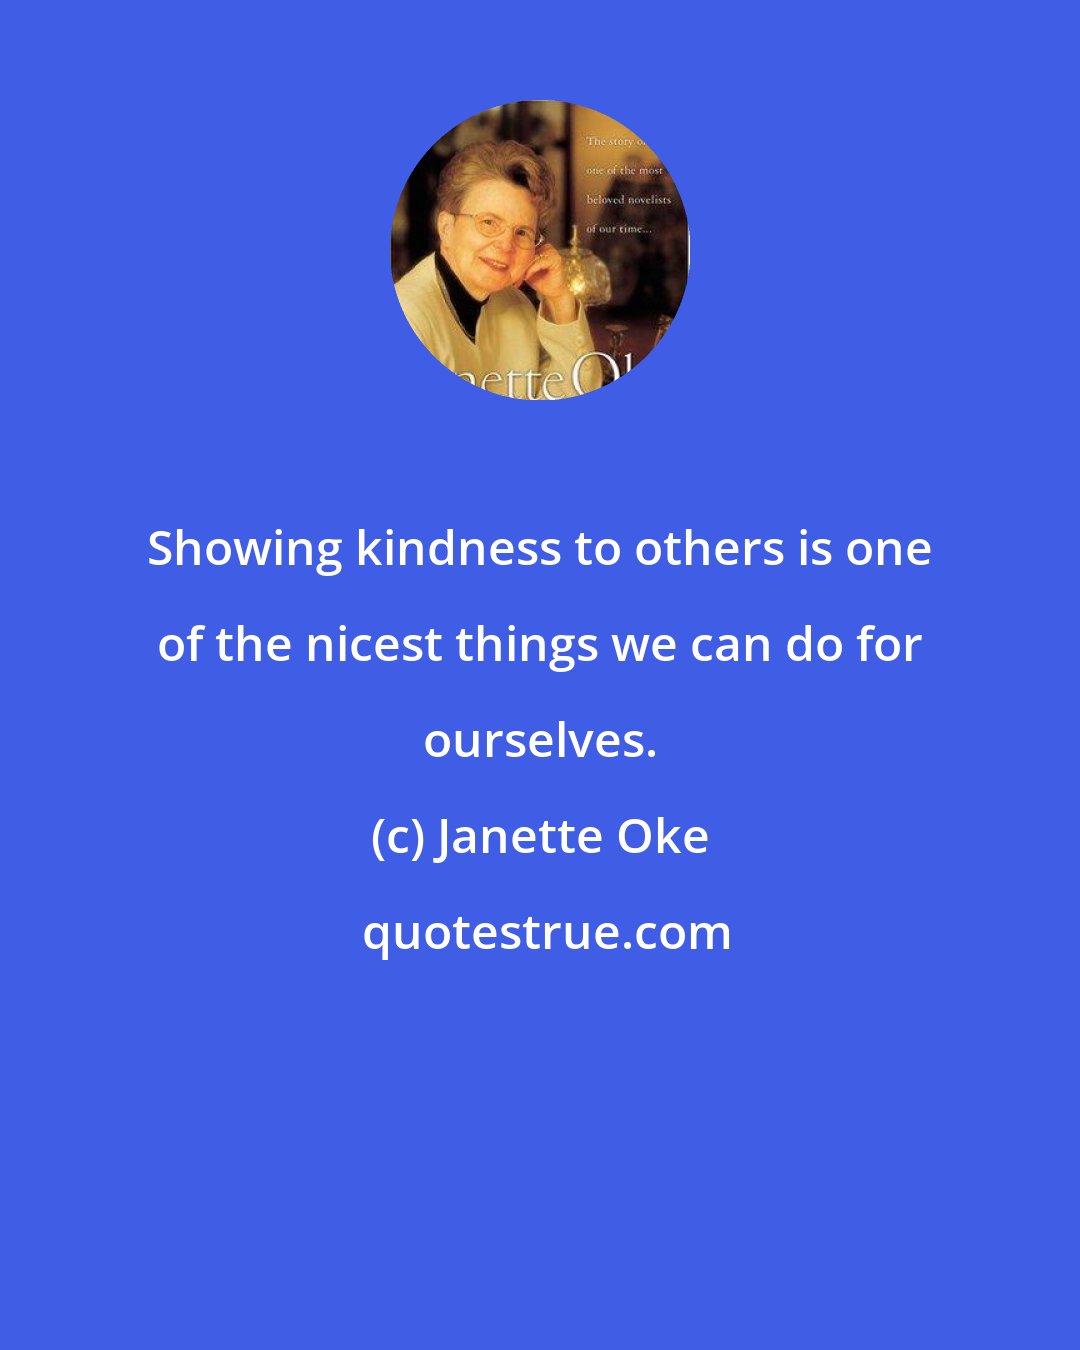 Janette Oke: Showing kindness to others is one of the nicest things we can do for ourselves.